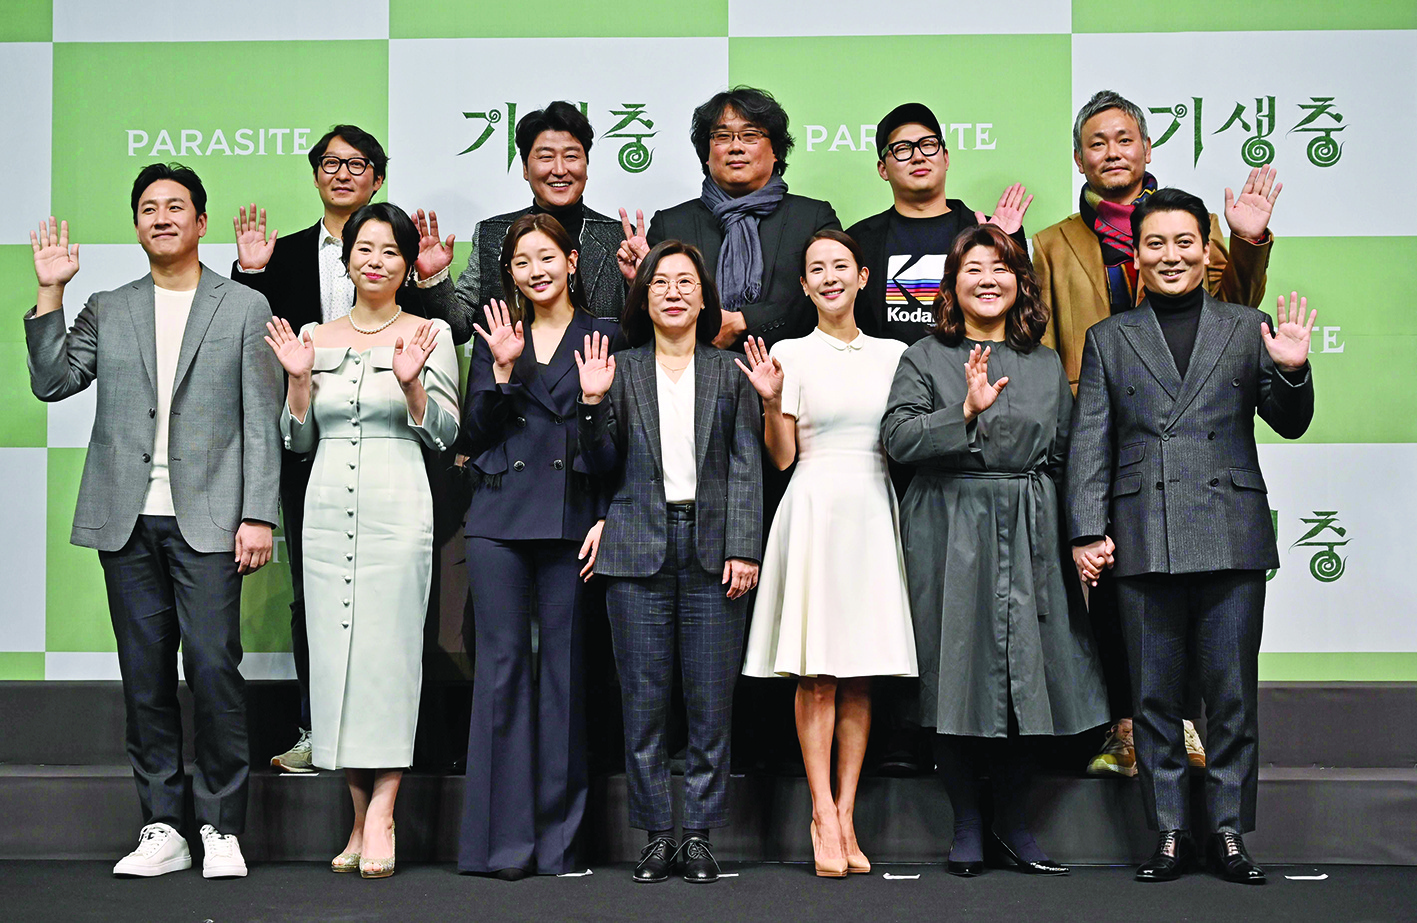 South Korean director Bong Joon-ho (top C) poses with the cast and crew members of the film Parasite during a press conference in Seoul on February 19, 2020, after his film won the Oscar for Best Picture. - Bong's movie Parasite -- about the widening gap between rich and poor -- became the first non-English-language film to win Hollywood's biggest prize on February 10, prompting celebrations in South Korea. (Photo by Jung Yeon-je / AFP)